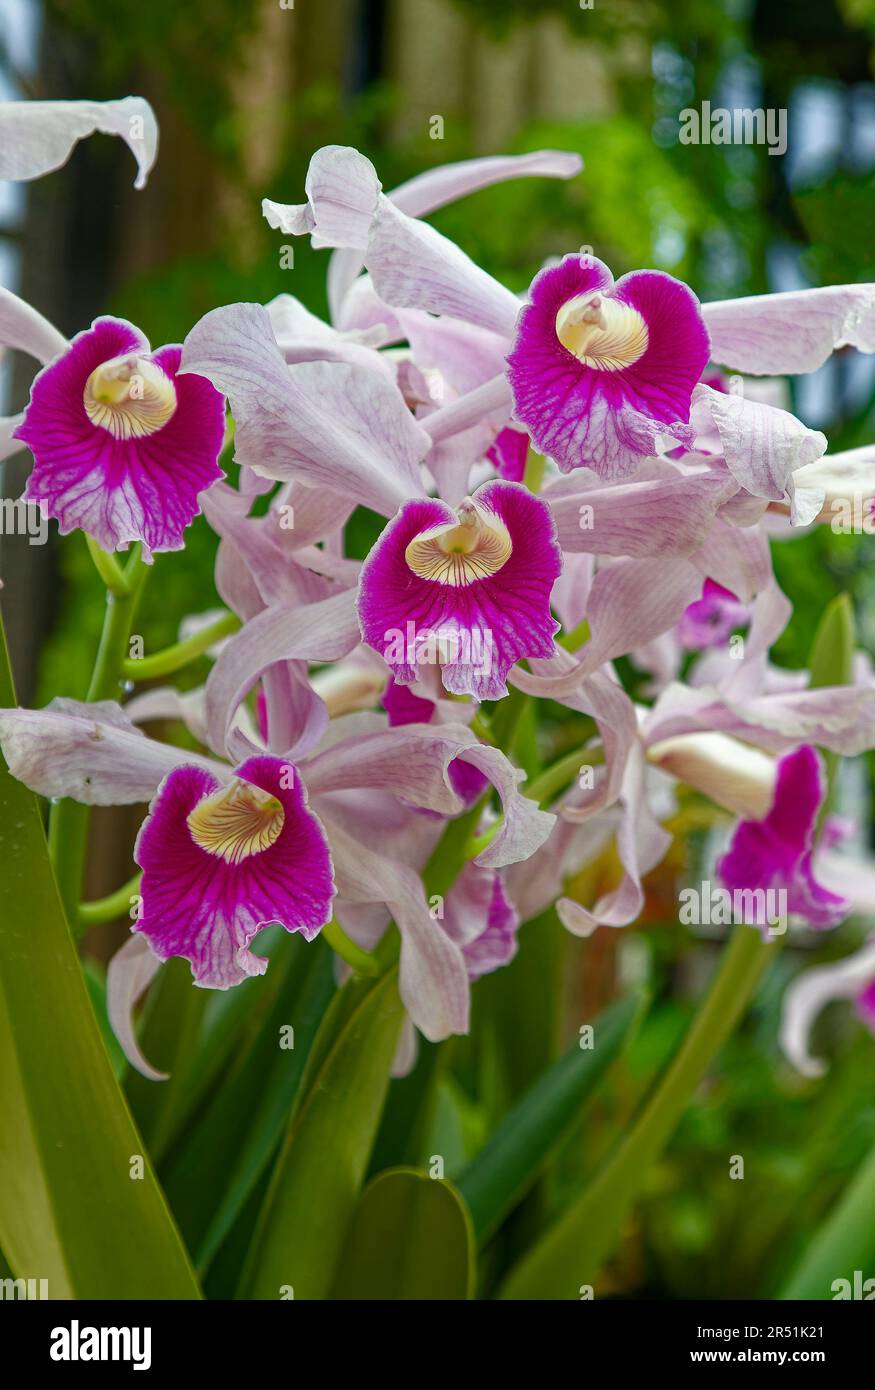 orchid, rose, lavender veined petals, yellos striped centers, bright green leaves, tropical flower, cultivated, indoors, bilateral symmetry, genus Orc Stock Photo